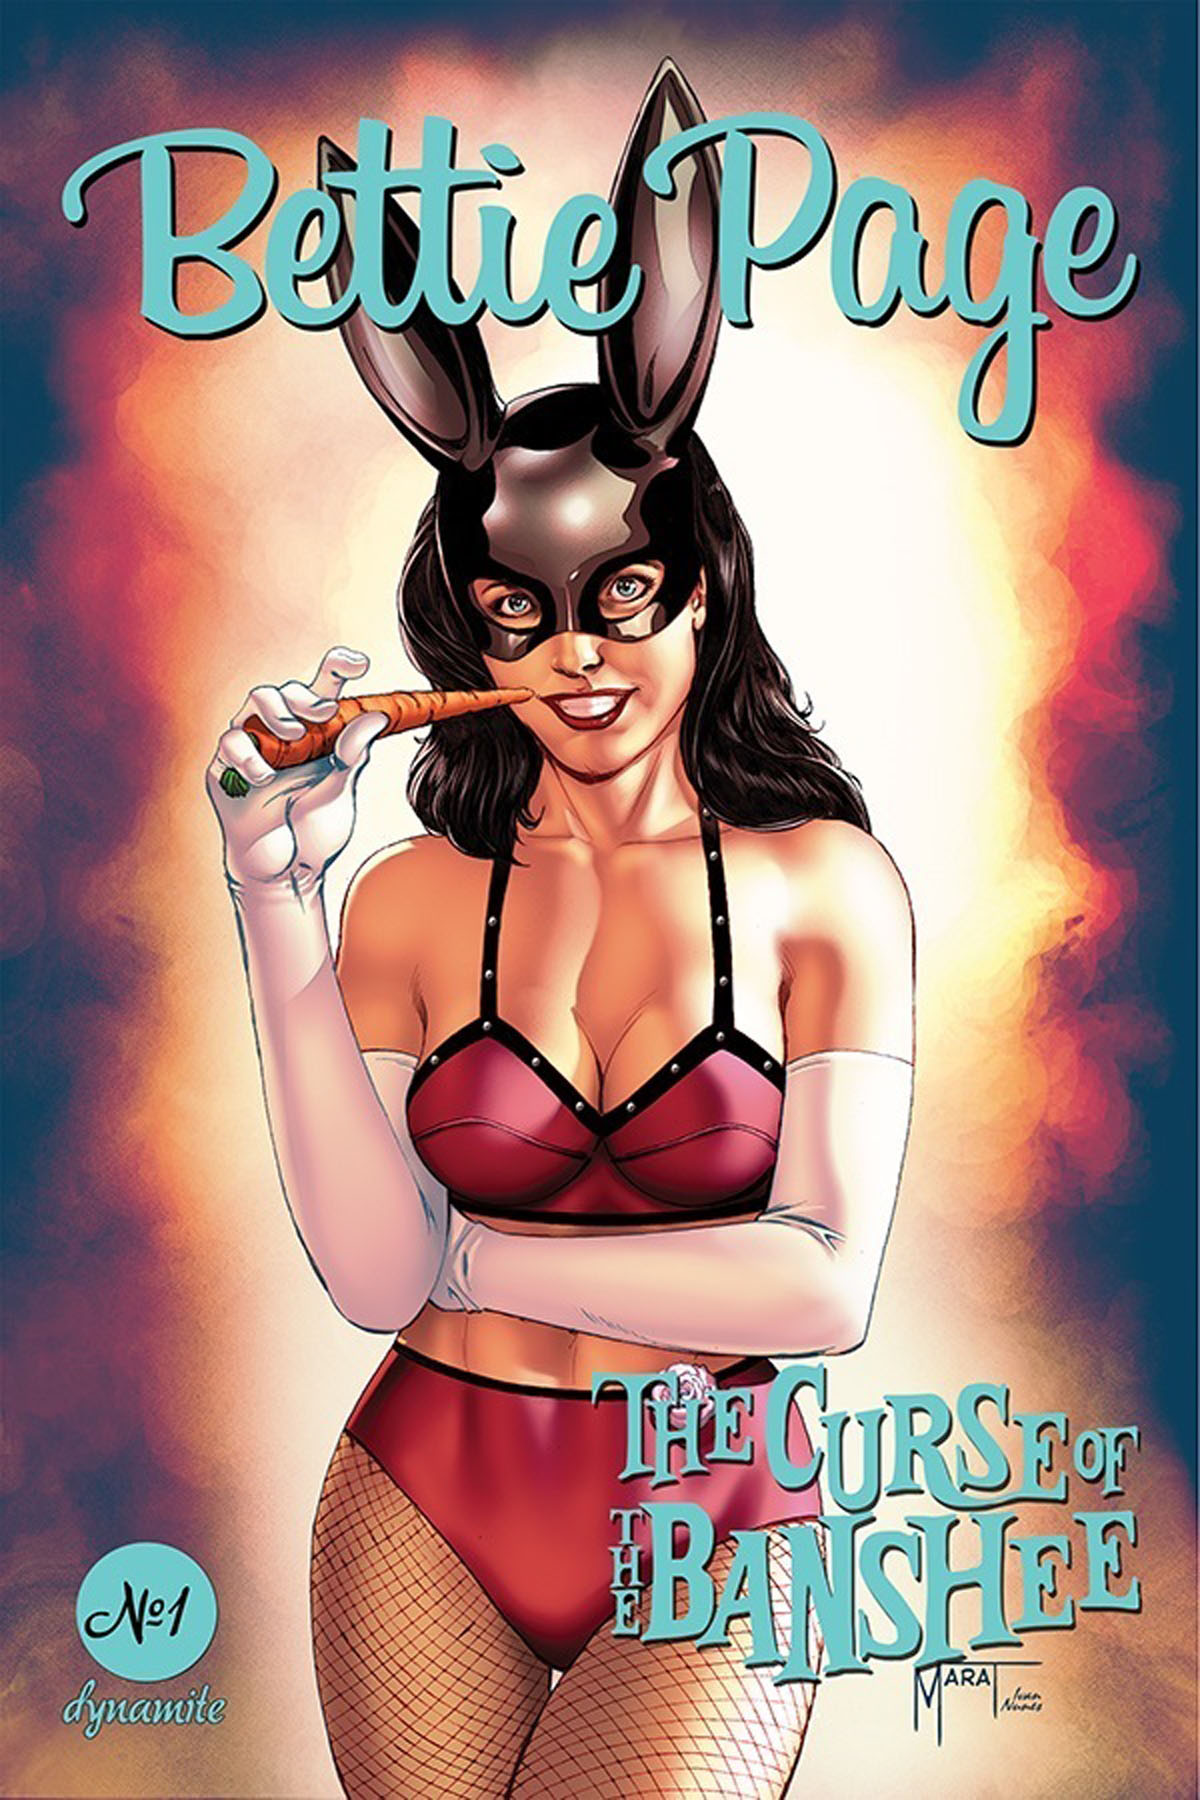 Bettie Page and the Curse of the Banshee #1 cover A by Mychels